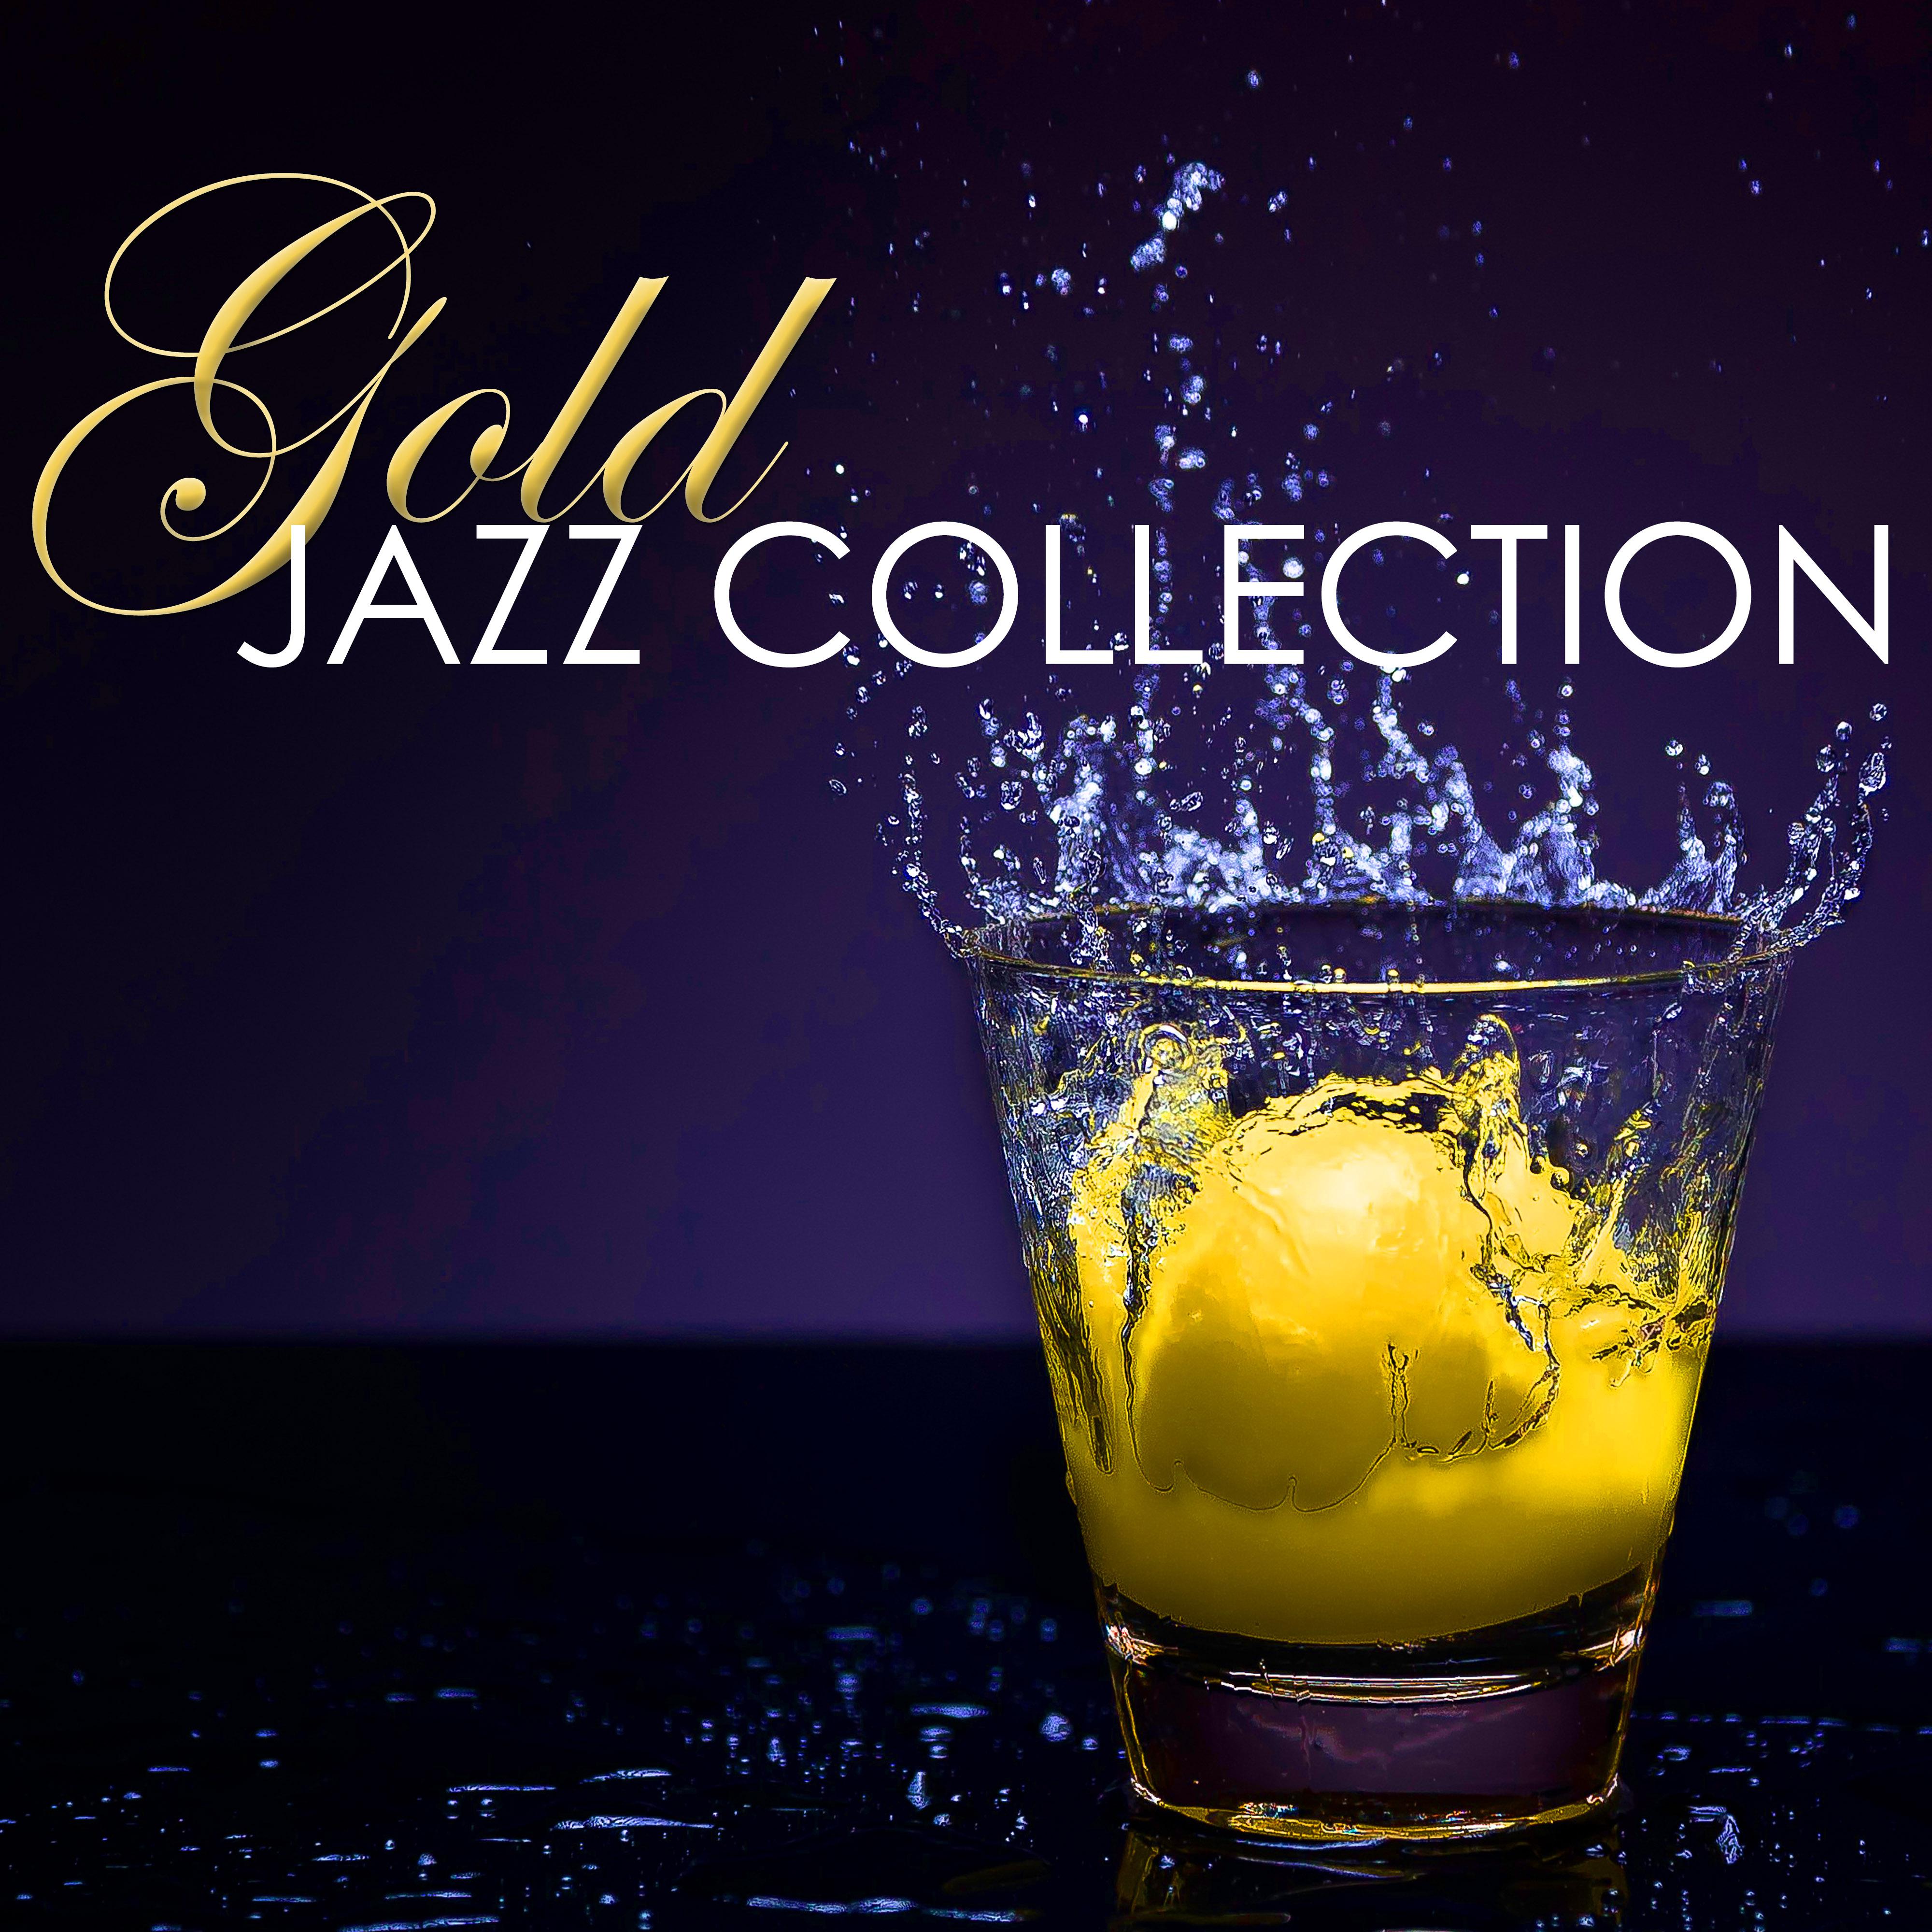 Gold Jazz Collection  Smooth Jazzy Cafe Instrumental Music, Best Romantic Sensual Songs